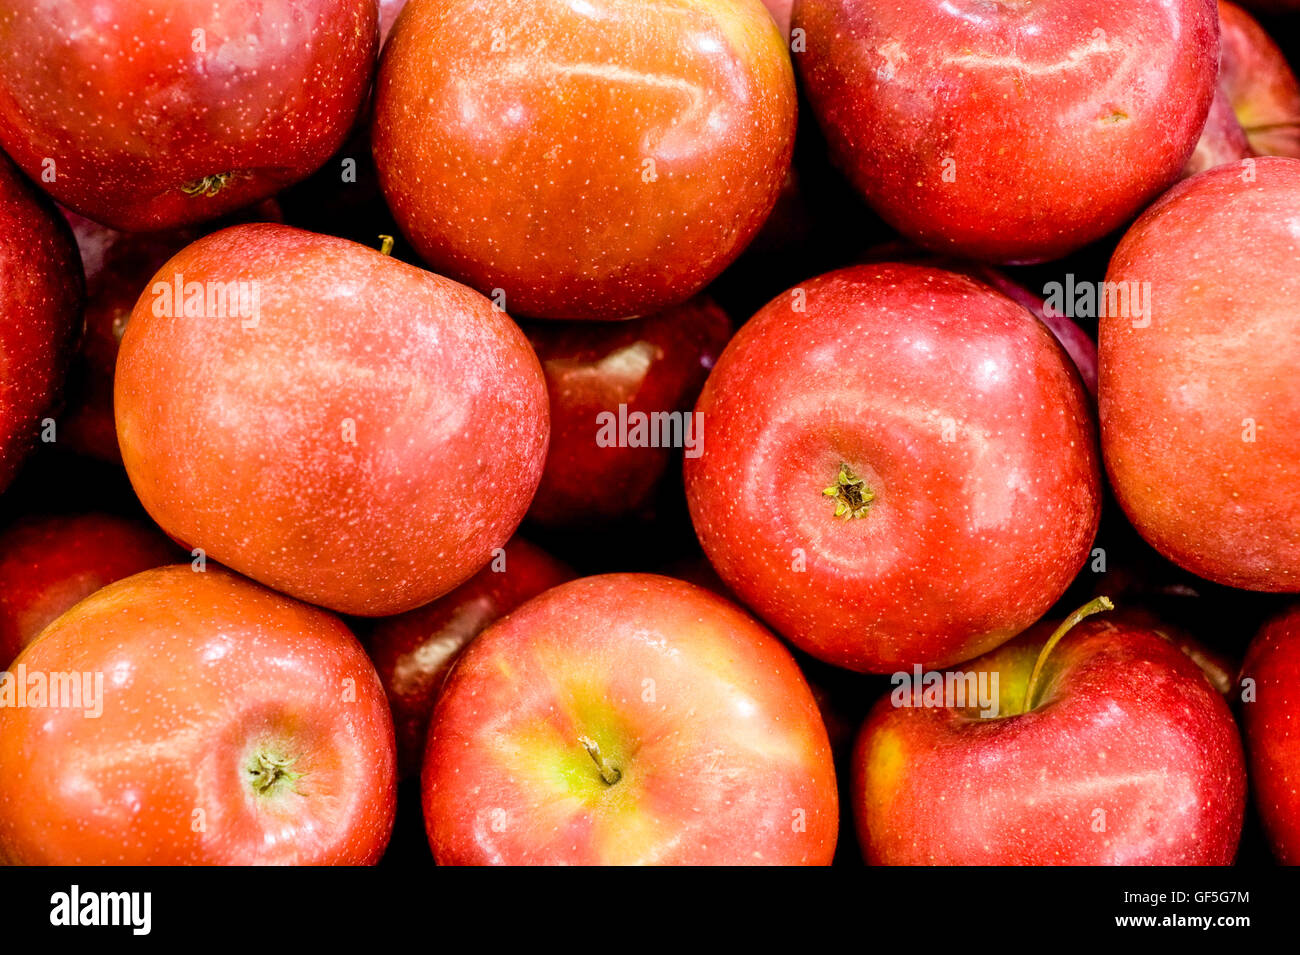 A pile of fresh, ripe red Apple Stock Photo